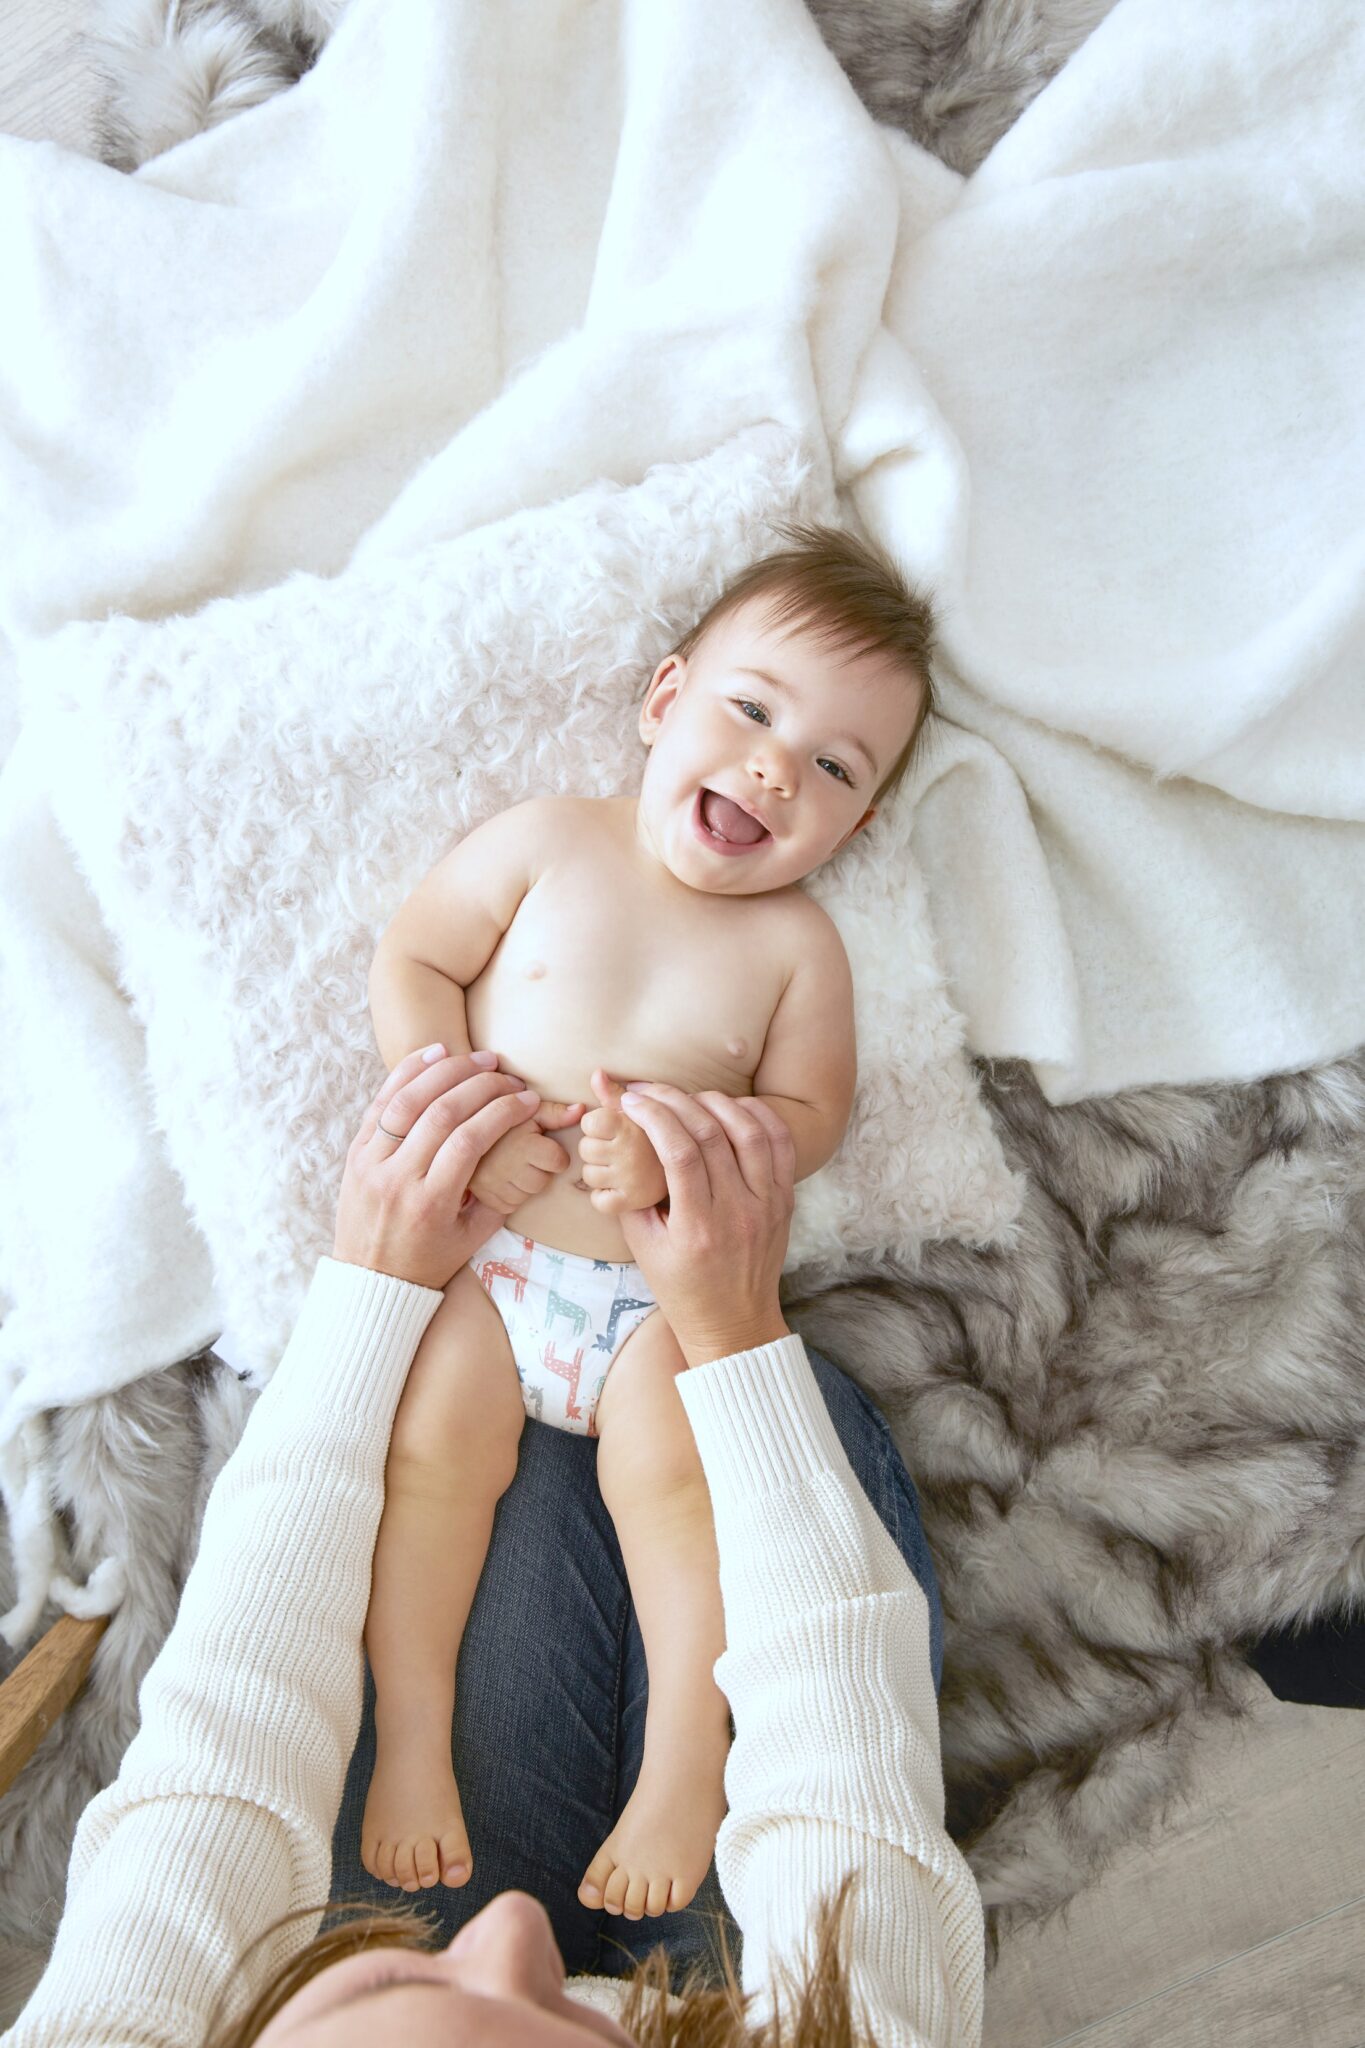 A smiling baby is being tickled by his mom, it is a top view looking down at the baby. He lies on blankets.